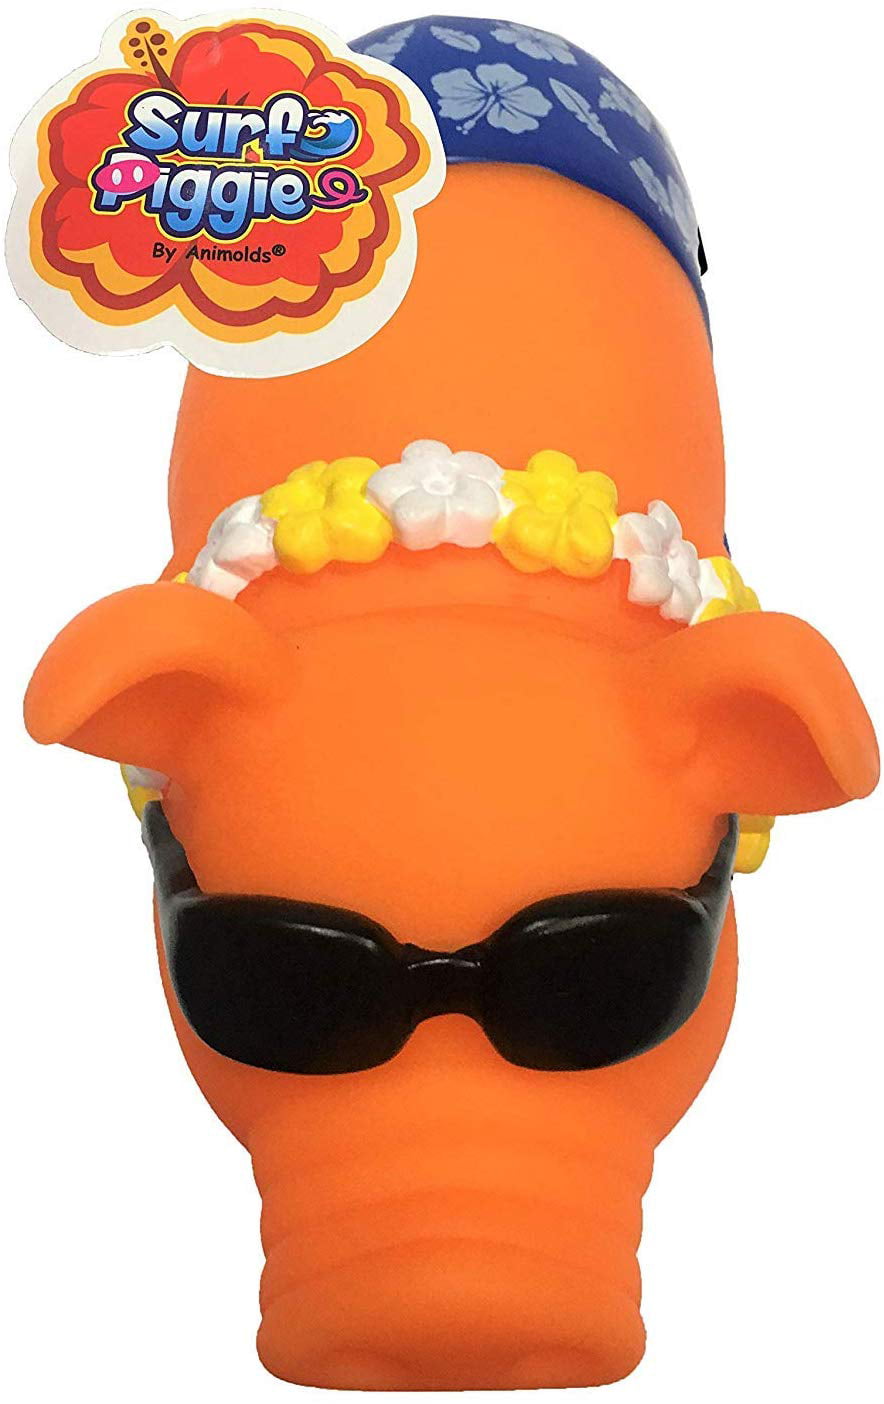 Orange Animolds Surf Piggie The Surfing & Snorting Pig Stress Relief Squeeze Toy Ideal Funny Novelty & Gag Gifts The Perfect Sensory Toys for Kids or Prank Toy for The Office 